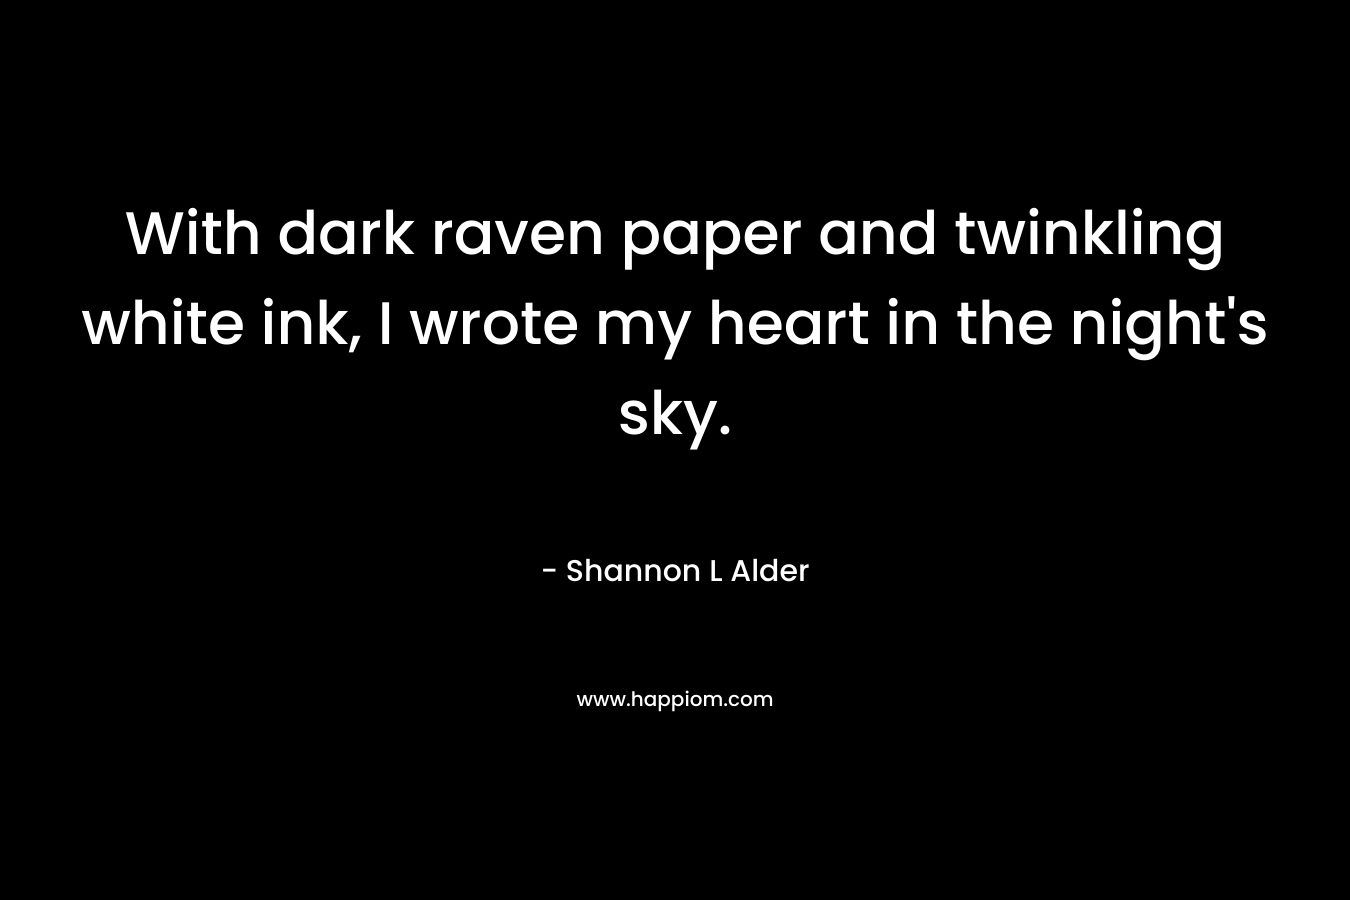 With dark raven paper and twinkling white ink, I wrote my heart in the night's sky.